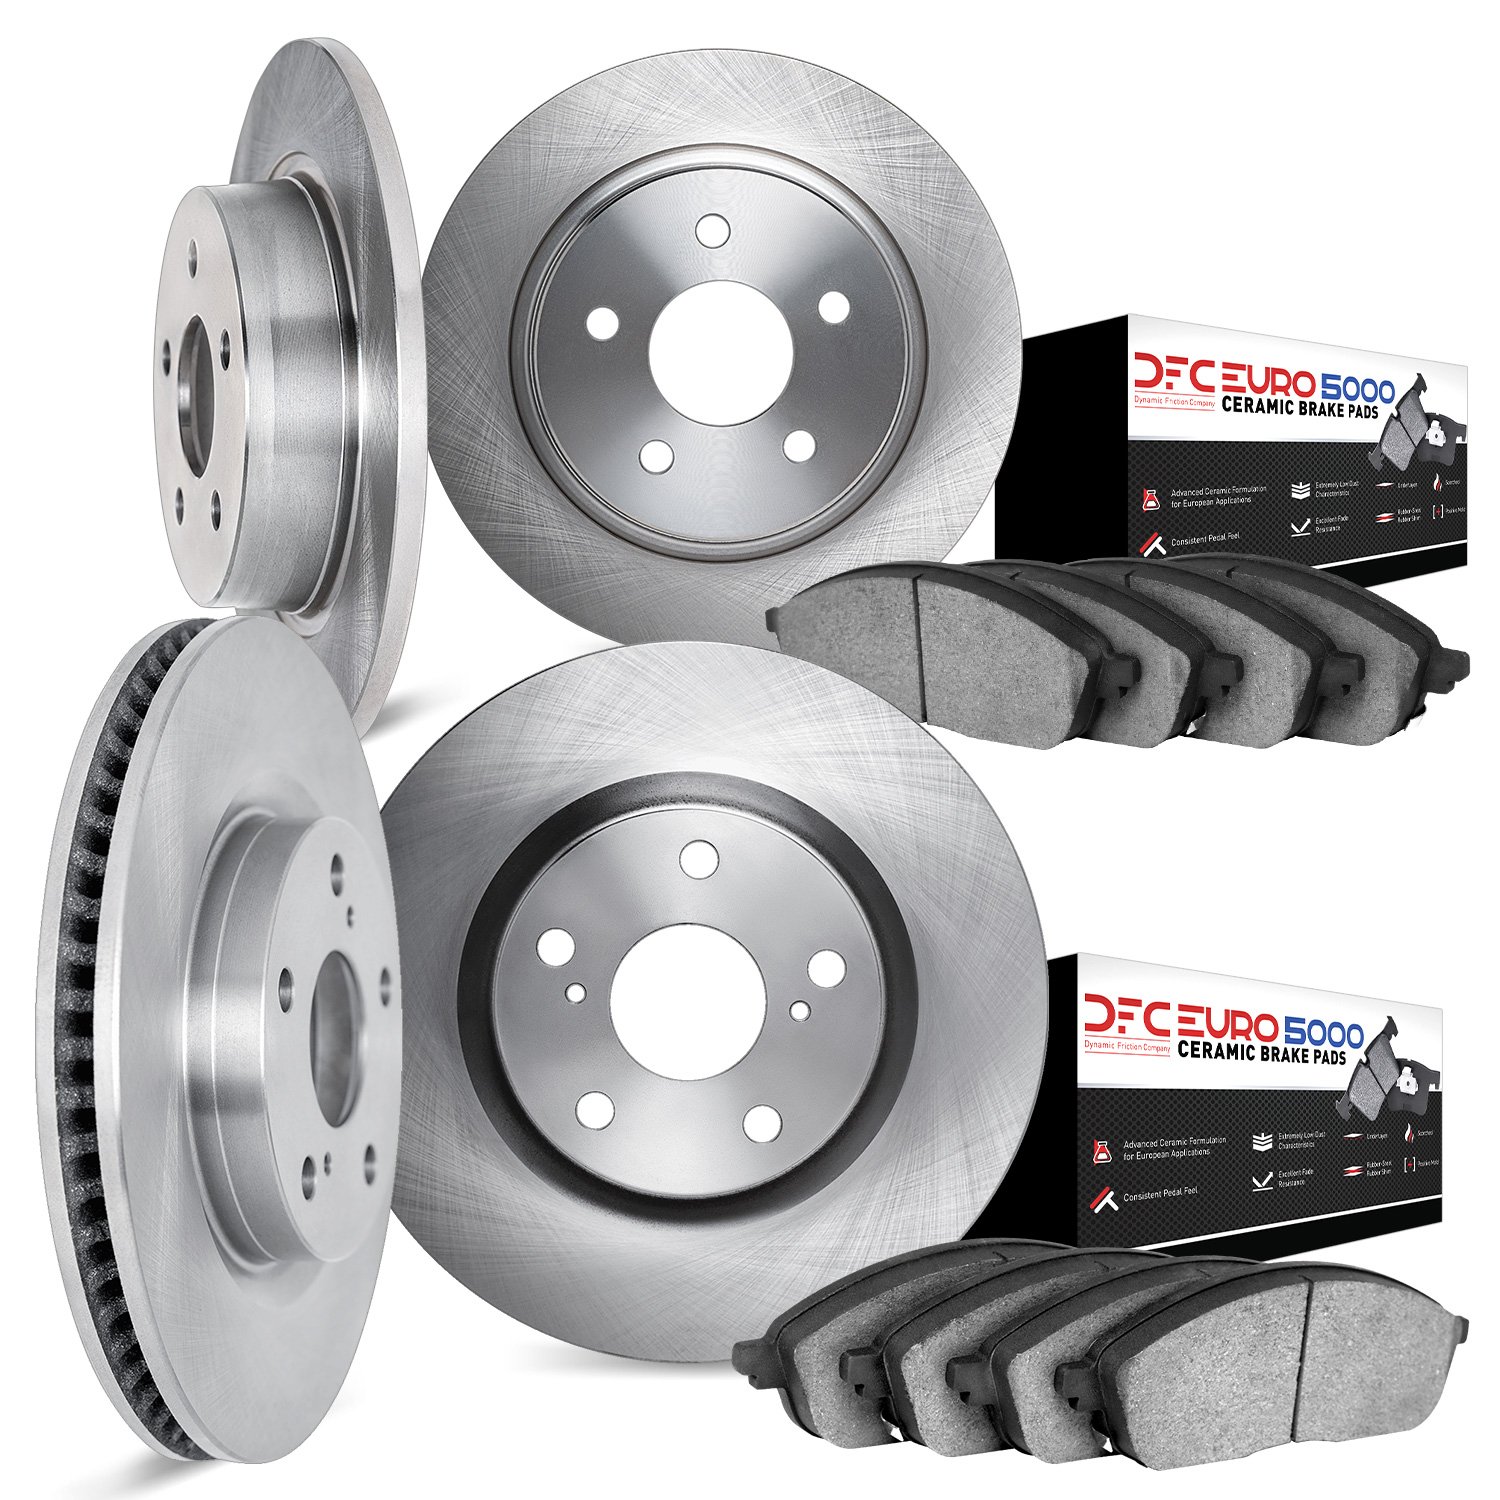 6604-11422 Brake Rotors w/5000 Euro Ceramic Brake Pads, 2007-2018 Volvo, Position: Front and Rear